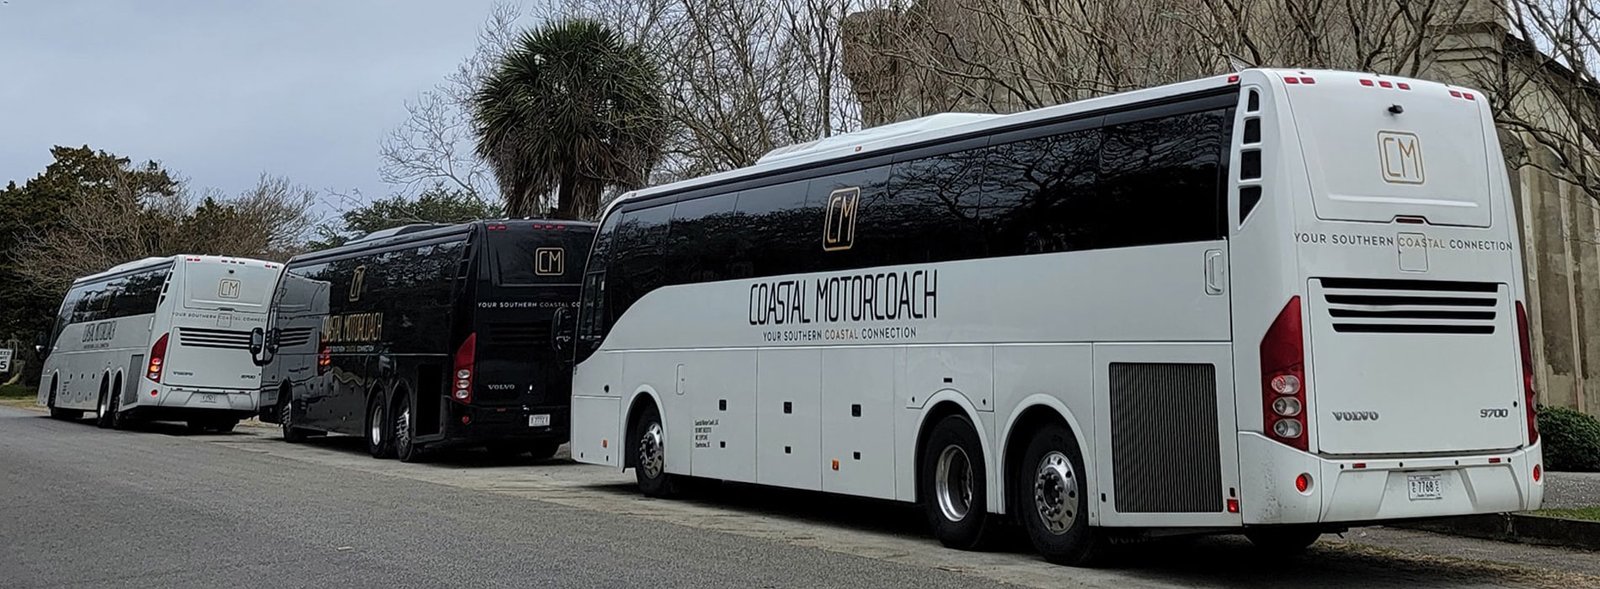 Corporate Excellence: Coastal Motorcoach’s Superior Transportation